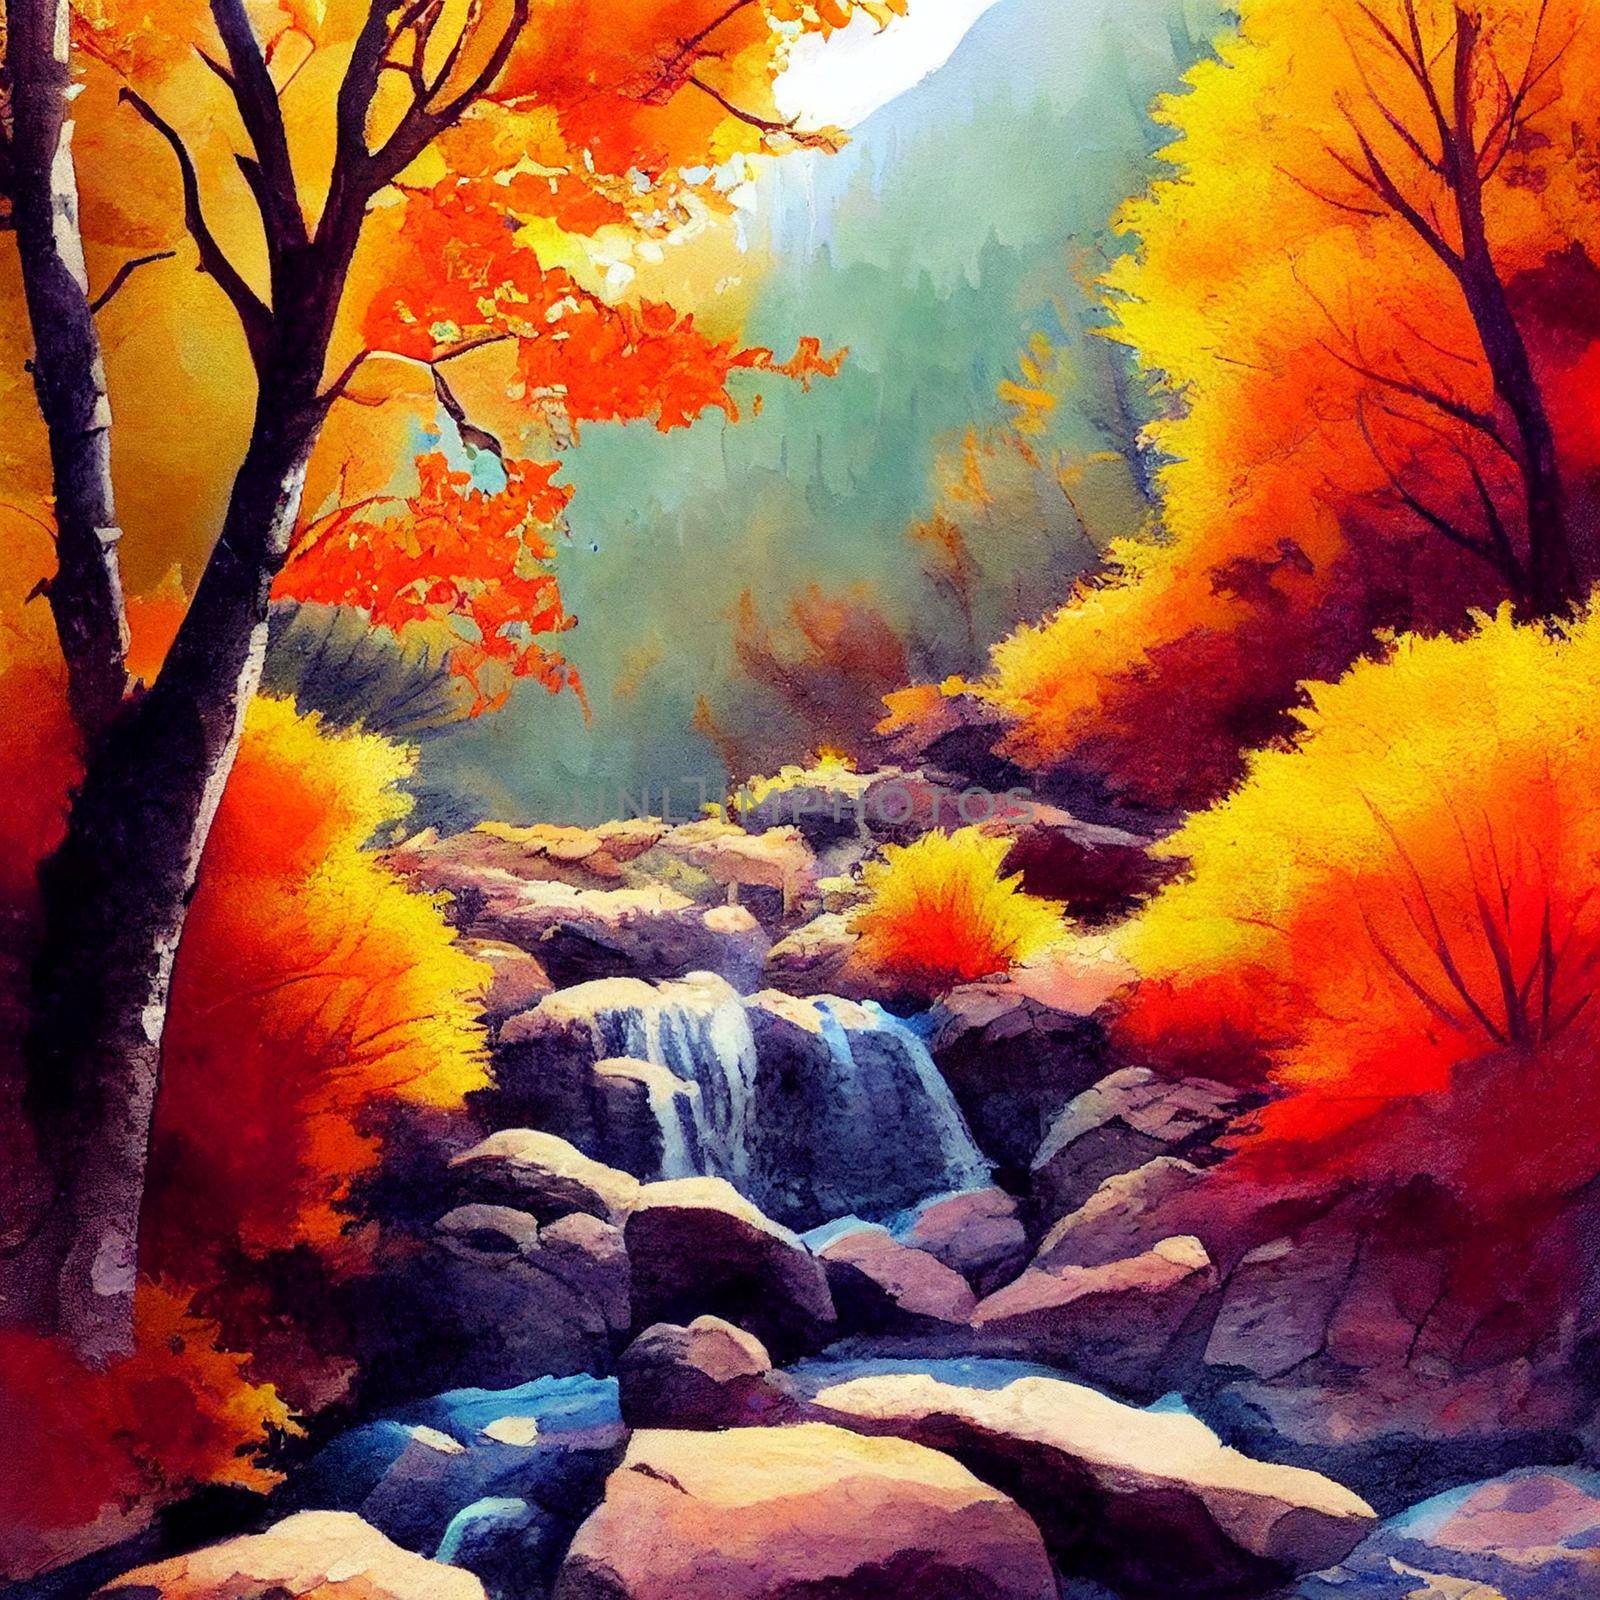 hiking in the autumn mountains, watercolor drawing. High quality illustration